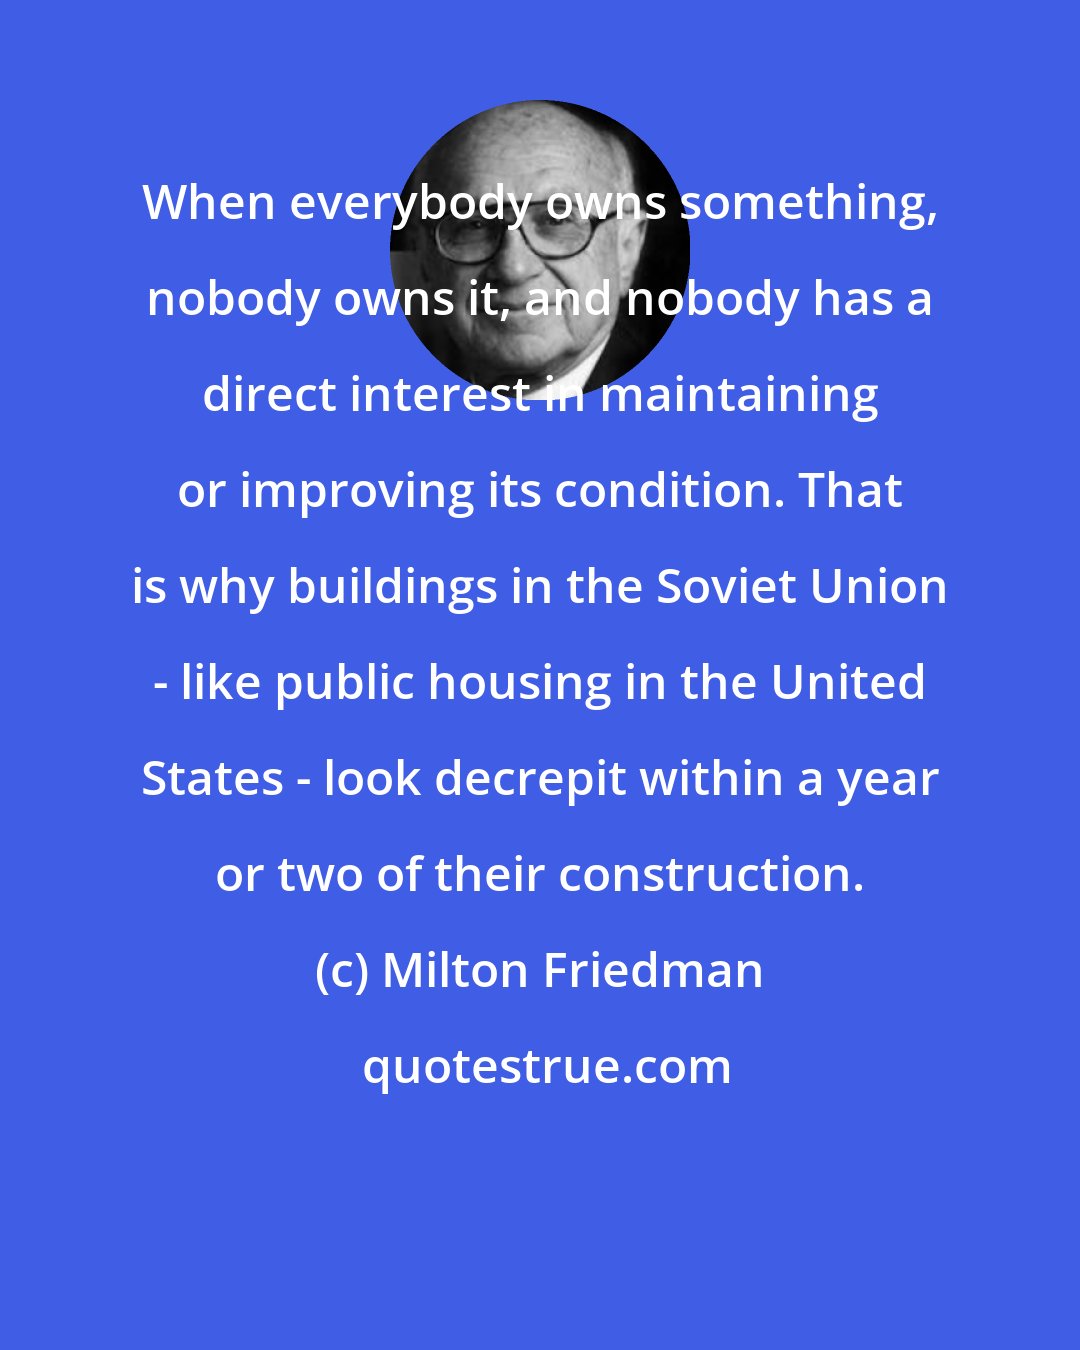 Milton Friedman: When everybody owns something, nobody owns it, and nobody has a direct interest in maintaining or improving its condition. That is why buildings in the Soviet Union - like public housing in the United States - look decrepit within a year or two of their construction.